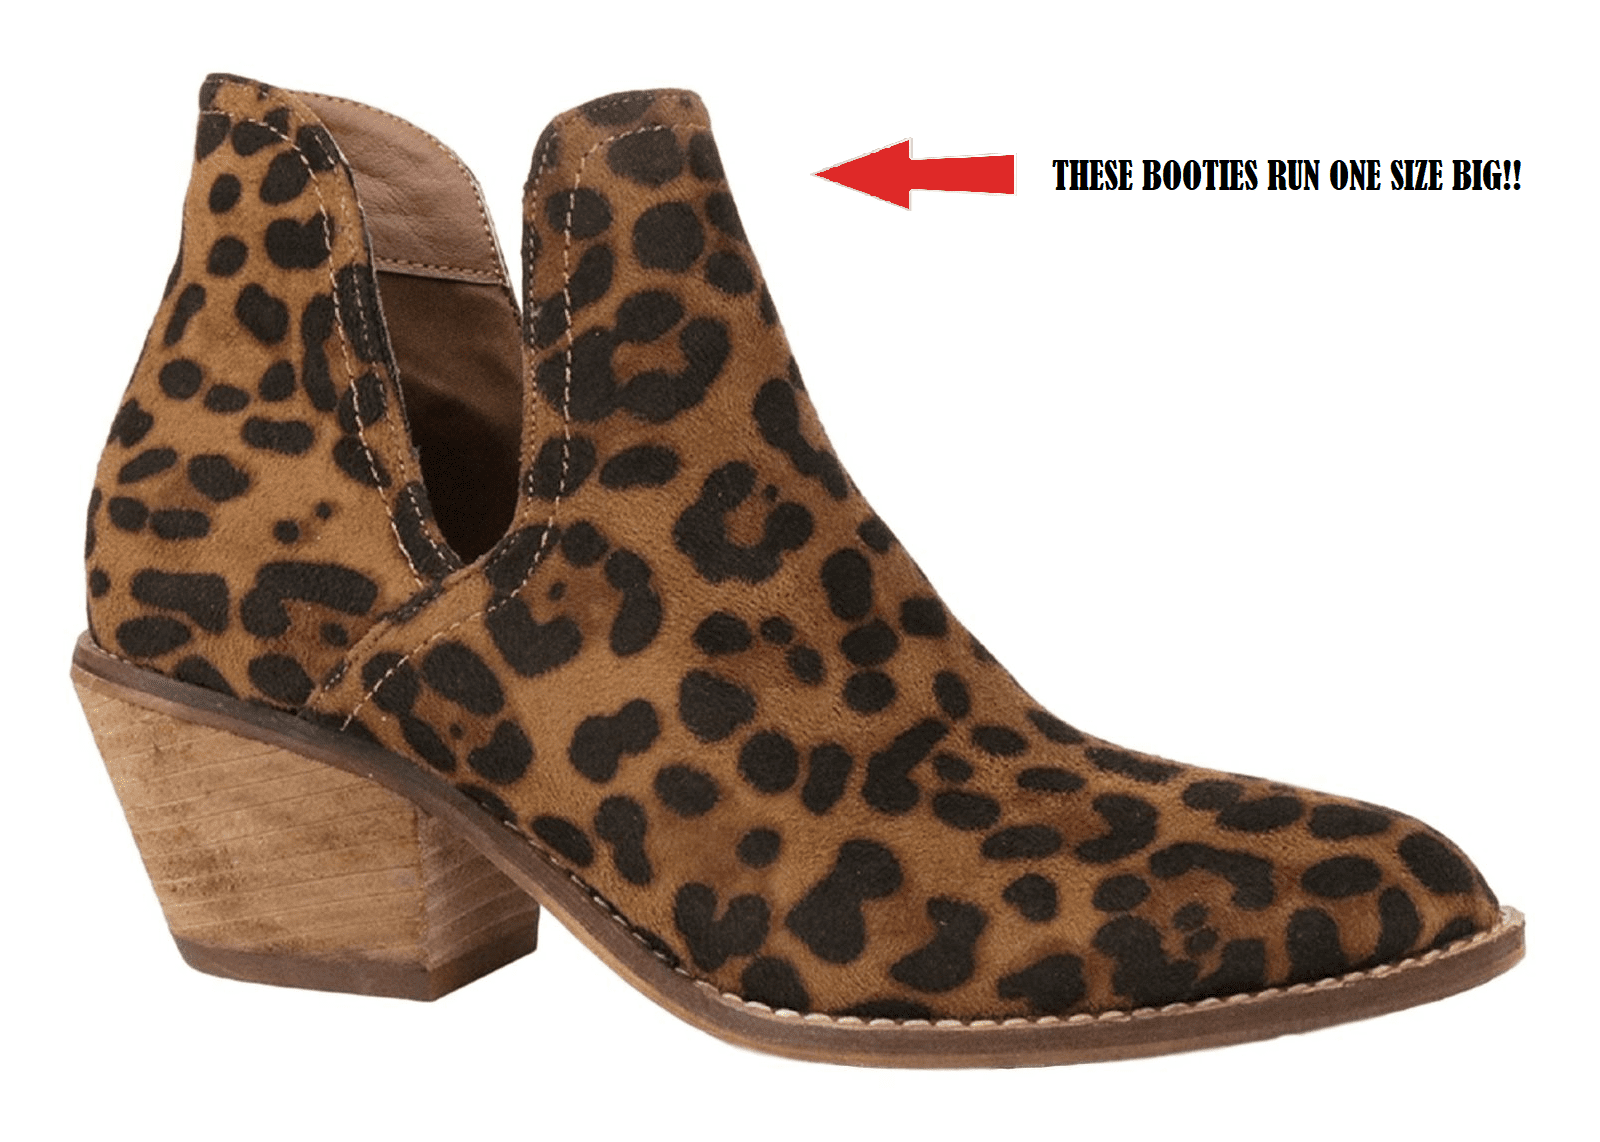 EZGD Sunny-01 Women Western Short Ankle Pointed Toe Booties Boots Animal  Leopard Print V Side Cut D'Orsay Faux Suede Leather Block Heel Size Run Big  US Size 11 